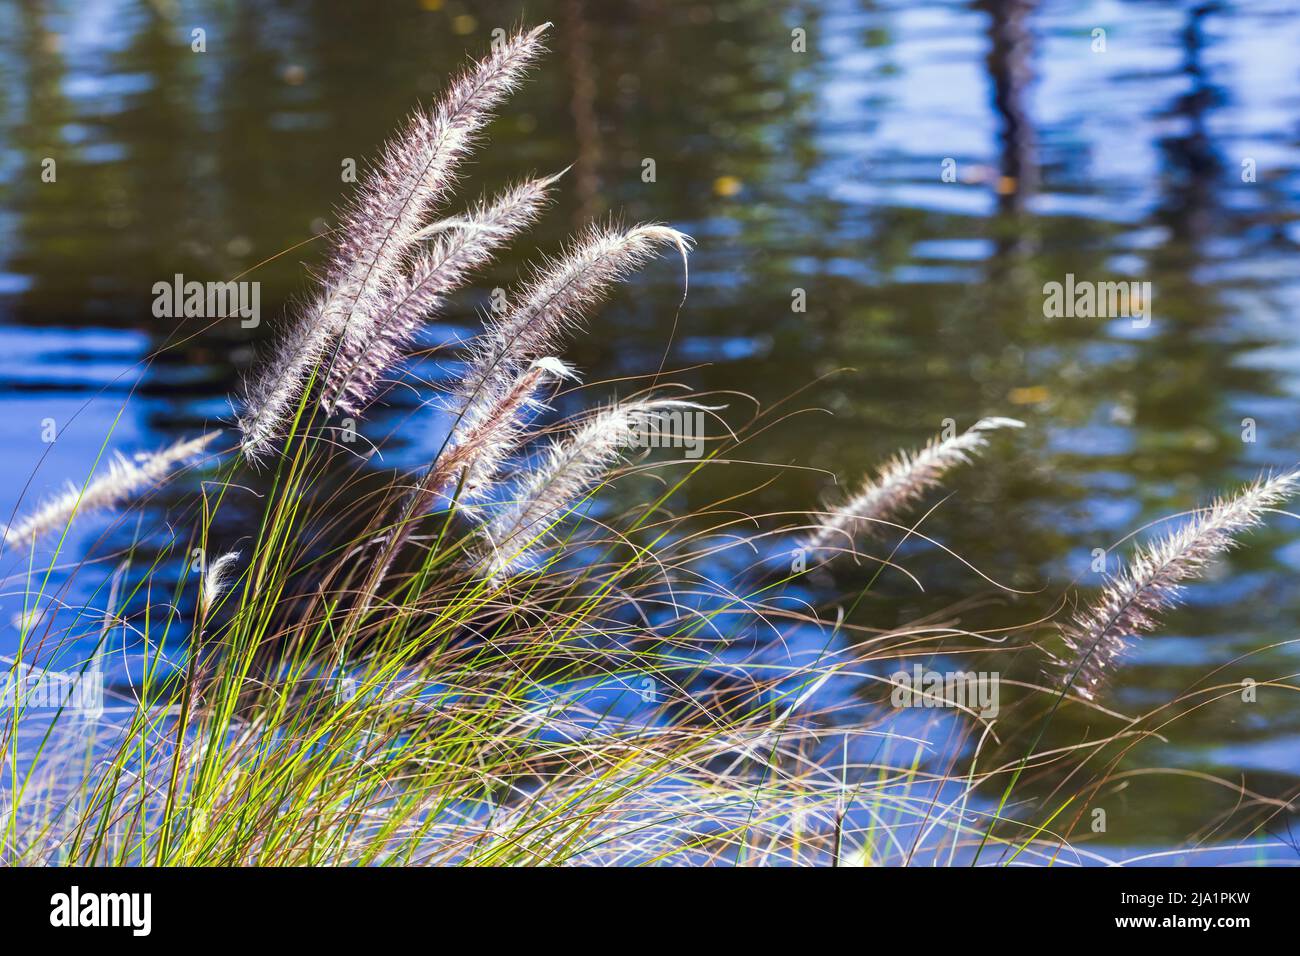 Cenchrus setaceus, commonly known as crimson fountaingrass, it is a perennial bunch grass that is native to open, scrubby habitats in East Africa, tro Stock Photo